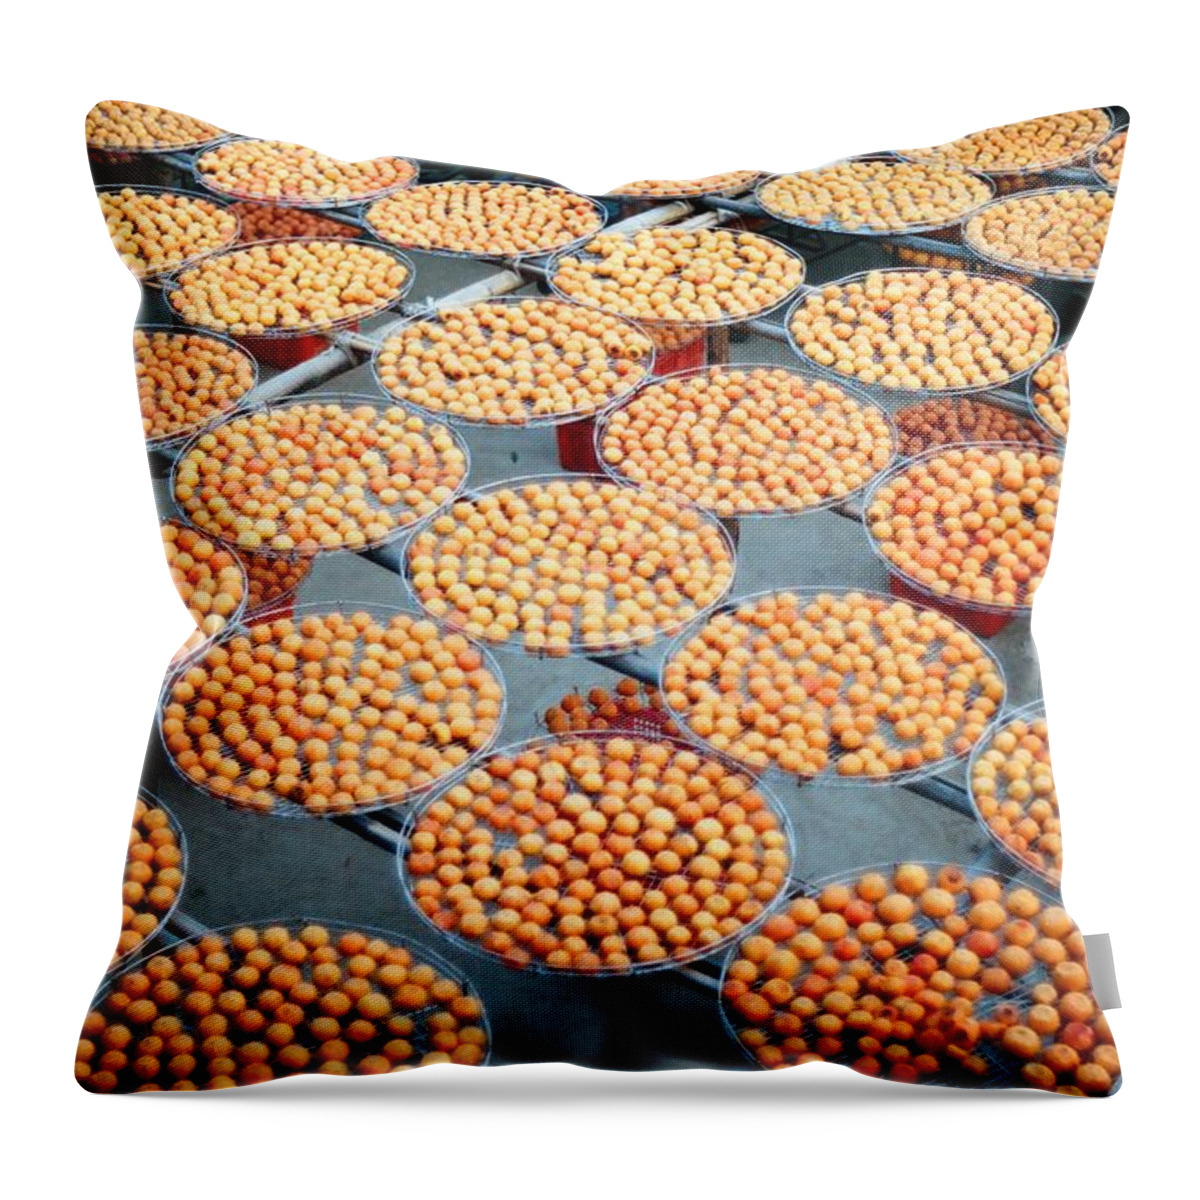 Taiwan Throw Pillow featuring the photograph Dried Persimmon by Rommel